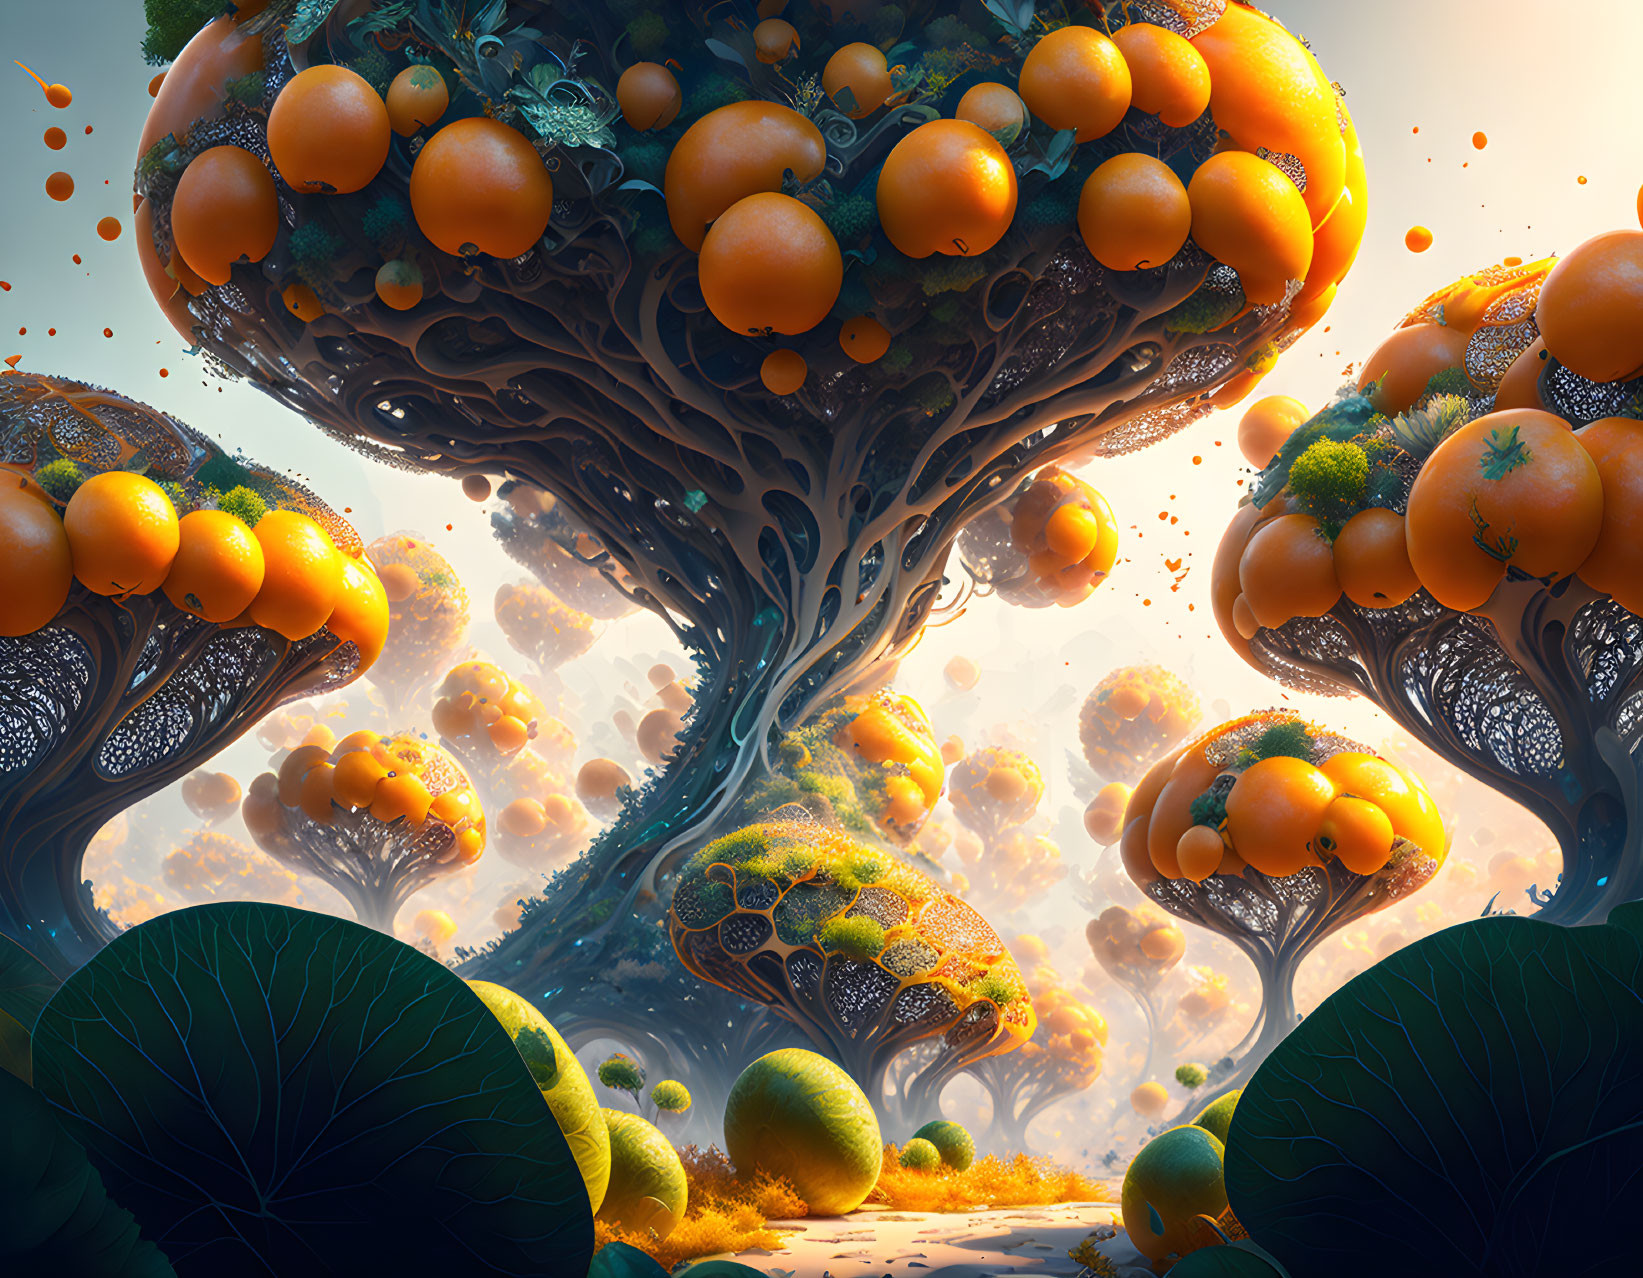 Surreal glowing environment with orange-like trees and oversized leaves